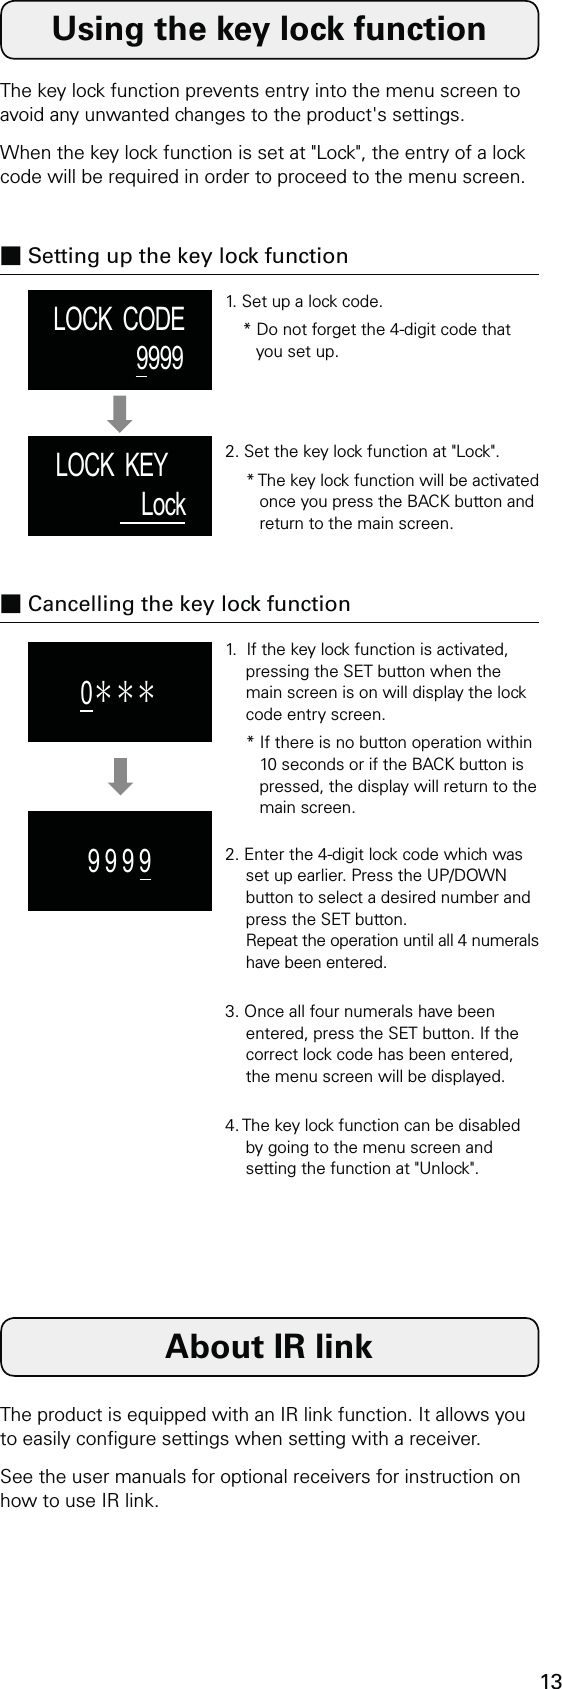 13LOCK  CODE9999LOCK  KEY     Lock0＊＊＊9 9 9 9Using the key lock functionThe key lock function prevents entry into the menu screen to avoid any unwanted changes to the product&apos;s settings.When the key lock function is set at &quot;Lock&quot;, the entry of a lock code will be required in order to proceed to the menu screen.■ Setting up the key lock function1. Set up a lock code.* Do not forget the 4-digit code that you set up.2. Set the key lock function at &quot;Lock&quot;.* The key lock function will be activated once you press the BACK button and return to the main screen.■ Cancelling the key lock function1.  If the key lock function is activated, pressing the SET button when the main screen is on will display the lock code entry screen.* If there is no button operation within 10 seconds or if the BACK button is pressed, the display will return to the main screen.2. Enter the 4-digit lock code which was set up earlier. Press the UP/DOWN button to select a desired number and press the SET button. Repeat the operation until all 4 numerals have been entered.3. Once all four numerals have been entered, press the SET button. If the correct lock code has been entered, the menu screen will be displayed.4. The key lock function can be disabled by going to the menu screen and setting the function at &quot;Unlock&quot;.About IR linkThe product is equipped with an IR link function. It allows you to easily congure settings when setting with a receiver.See the user manuals for optional receivers for instruction on how to use IR link.